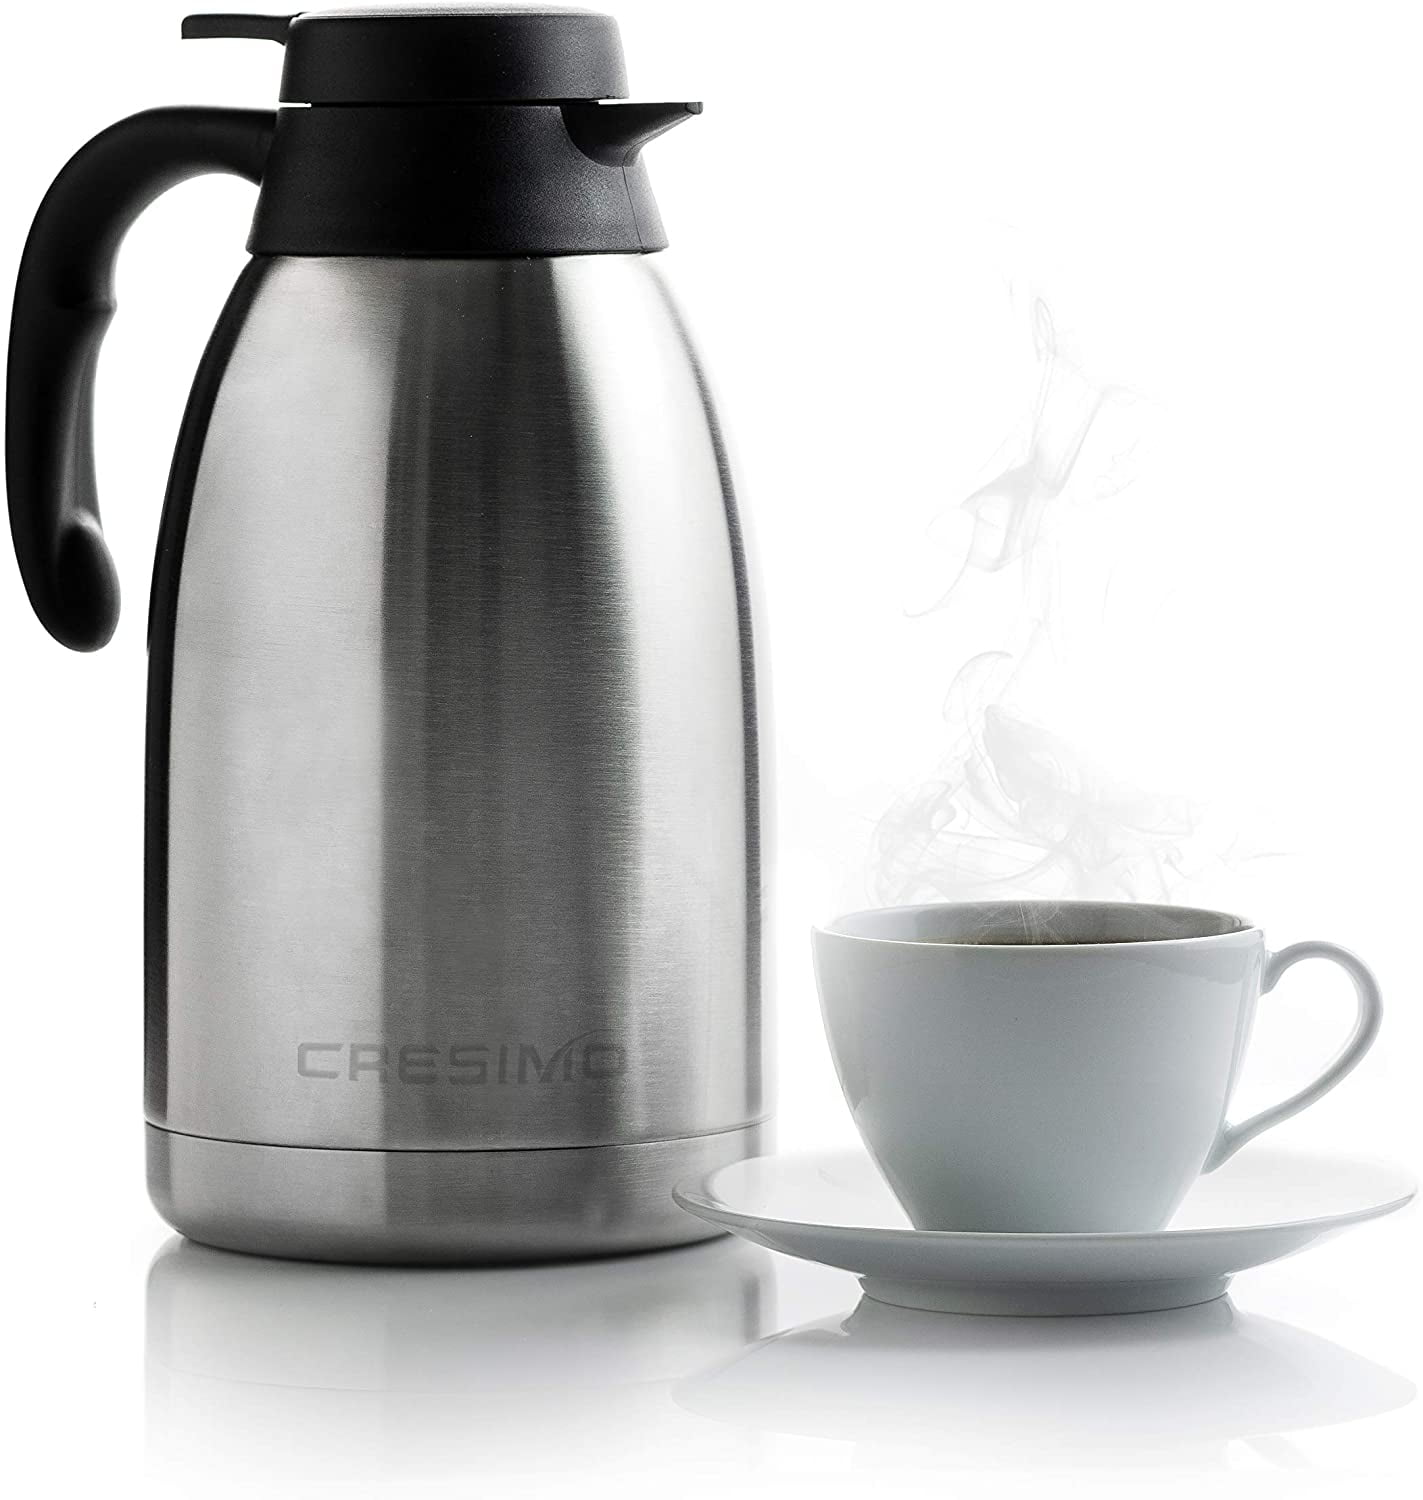 and Coffee Dispenser 68 Oz Stainless Steel Thermal Coffee Carafe,Insulated Coffee Thermos,Keep water hot up to 12 Hours,2 Liter Tea Water 